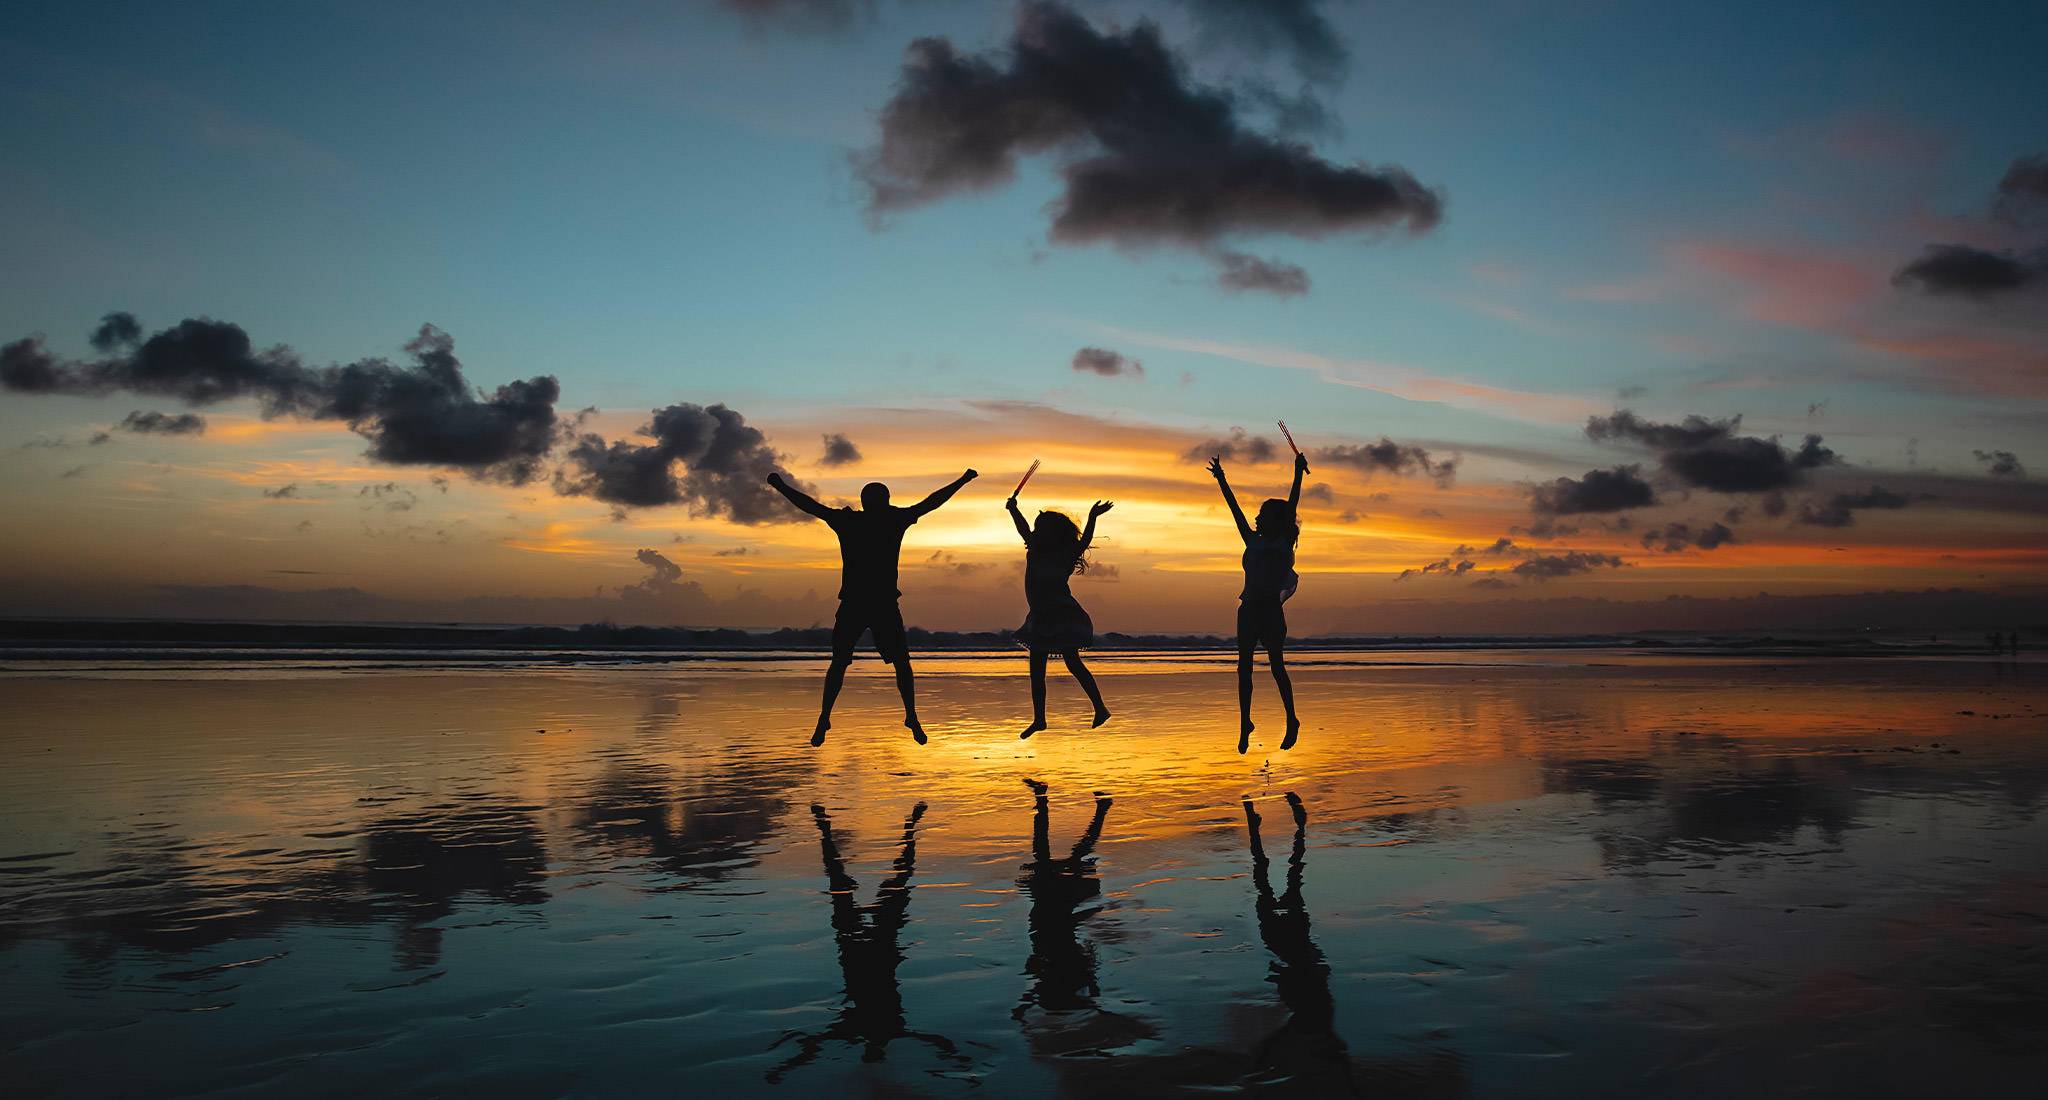 Silhouette of three people jumping in the air at the beach during sunset.